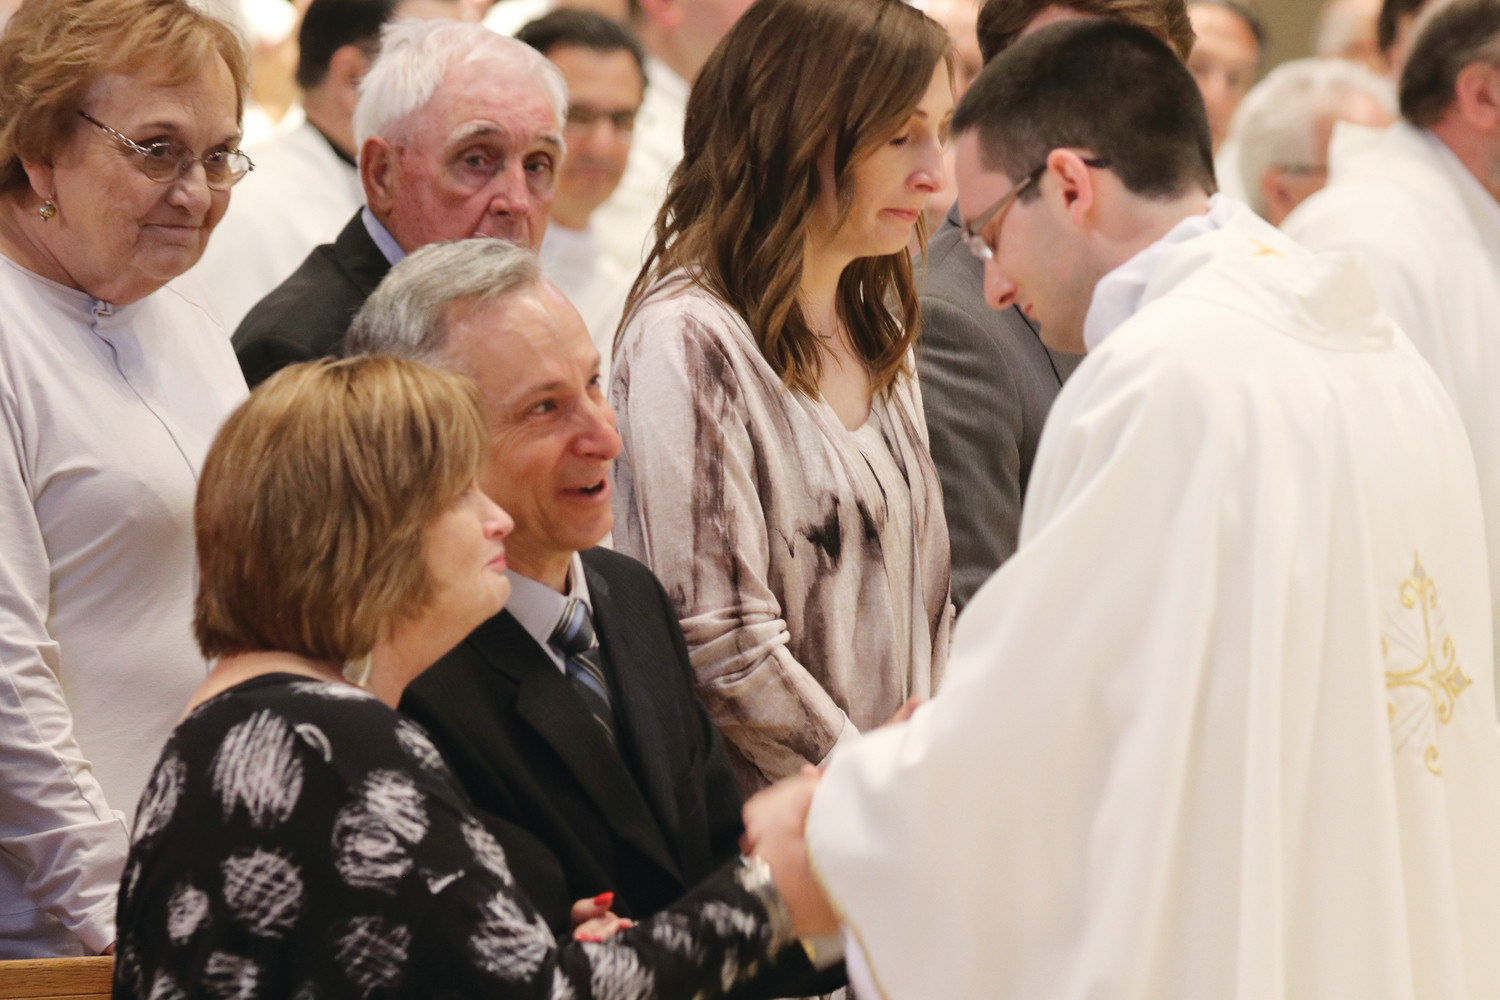 Father Dufour, in an emotional moment for the family, offers a blessing upon his parents, Jerry and Denise Dufour, as his sister Elise Augustine holds back tears of joy.